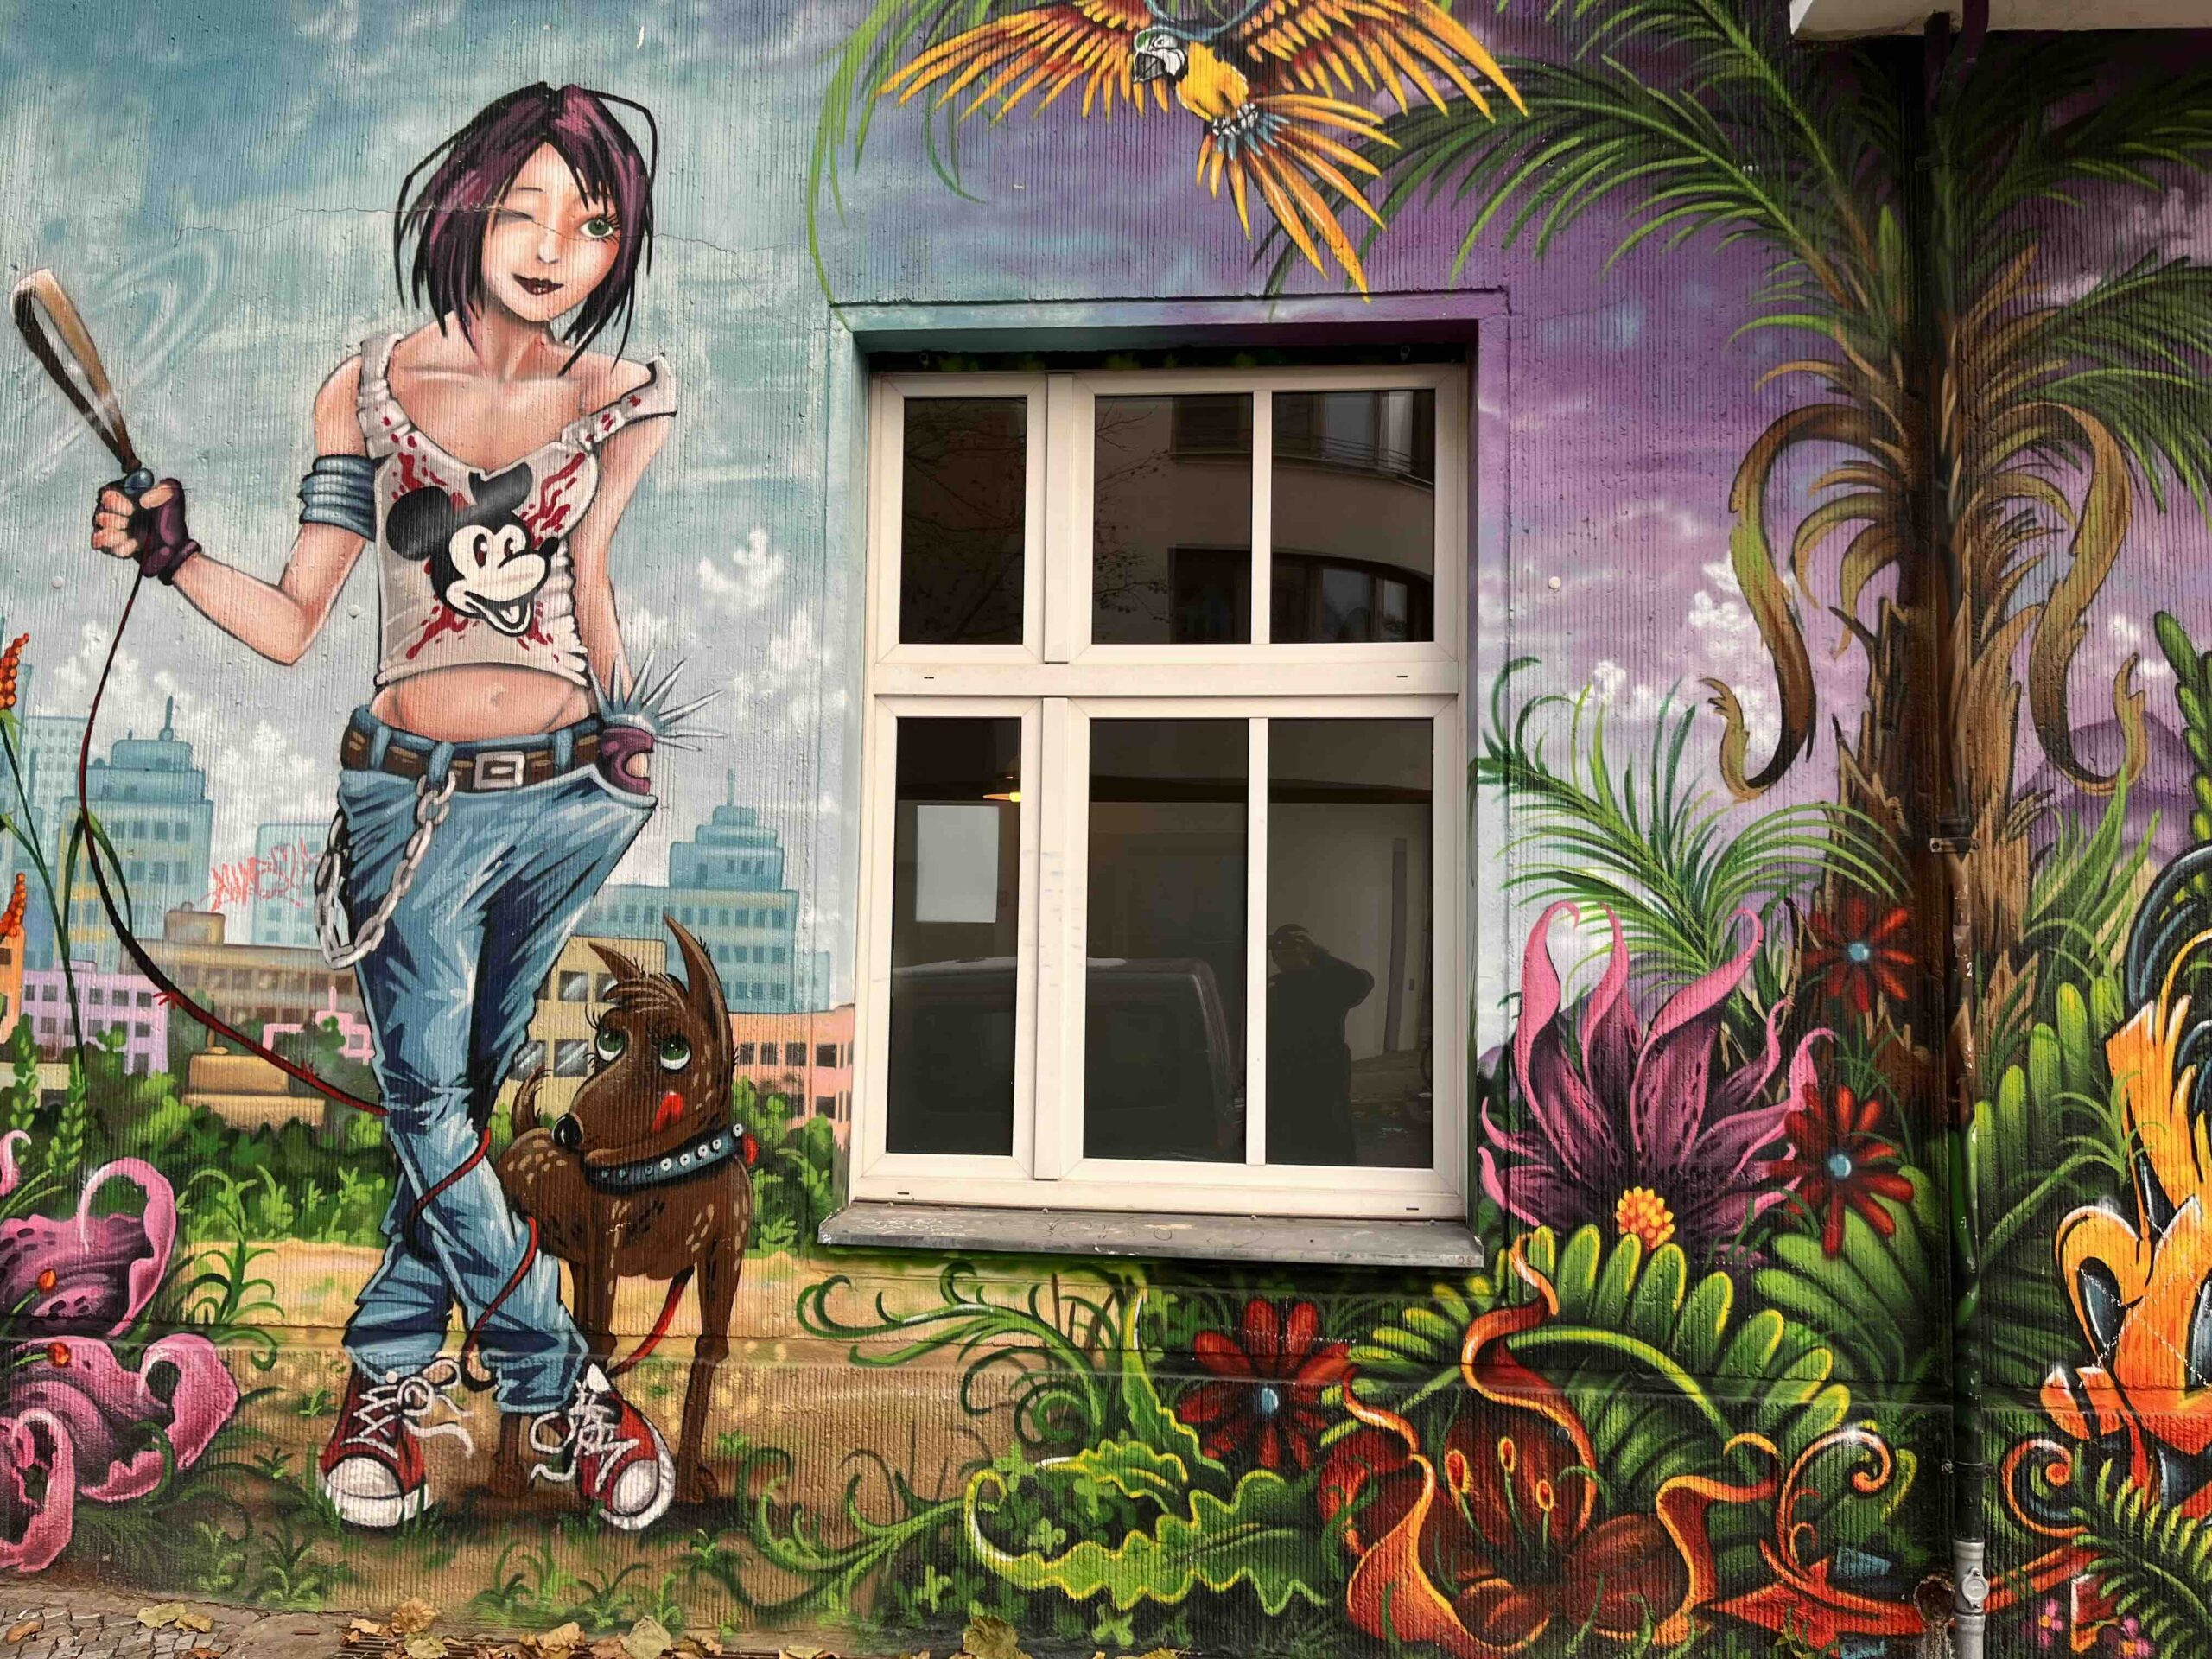 Graffiti of a young woman with a mickey mouse tank on standing in a field of flowers. She has a dog with her.